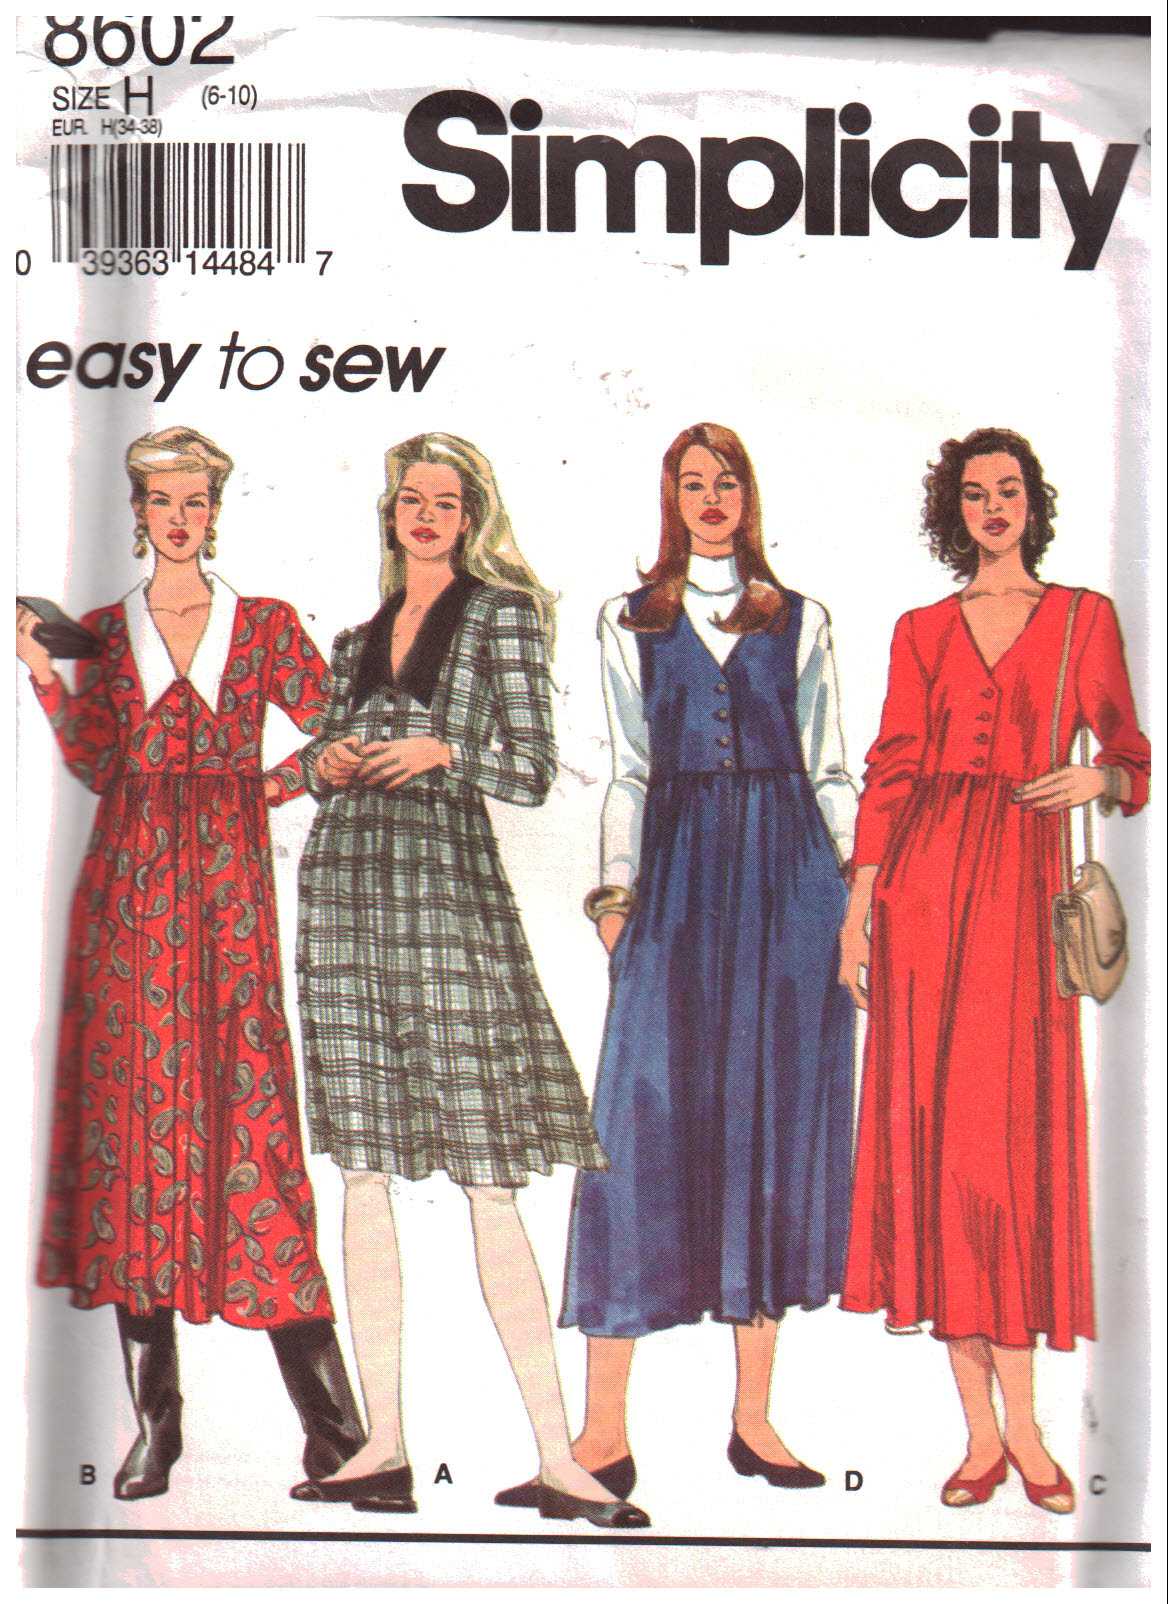 Simplicity 8602 Dress in two lengths, Jumper Size: H 6-10 Uncut Sewing ...